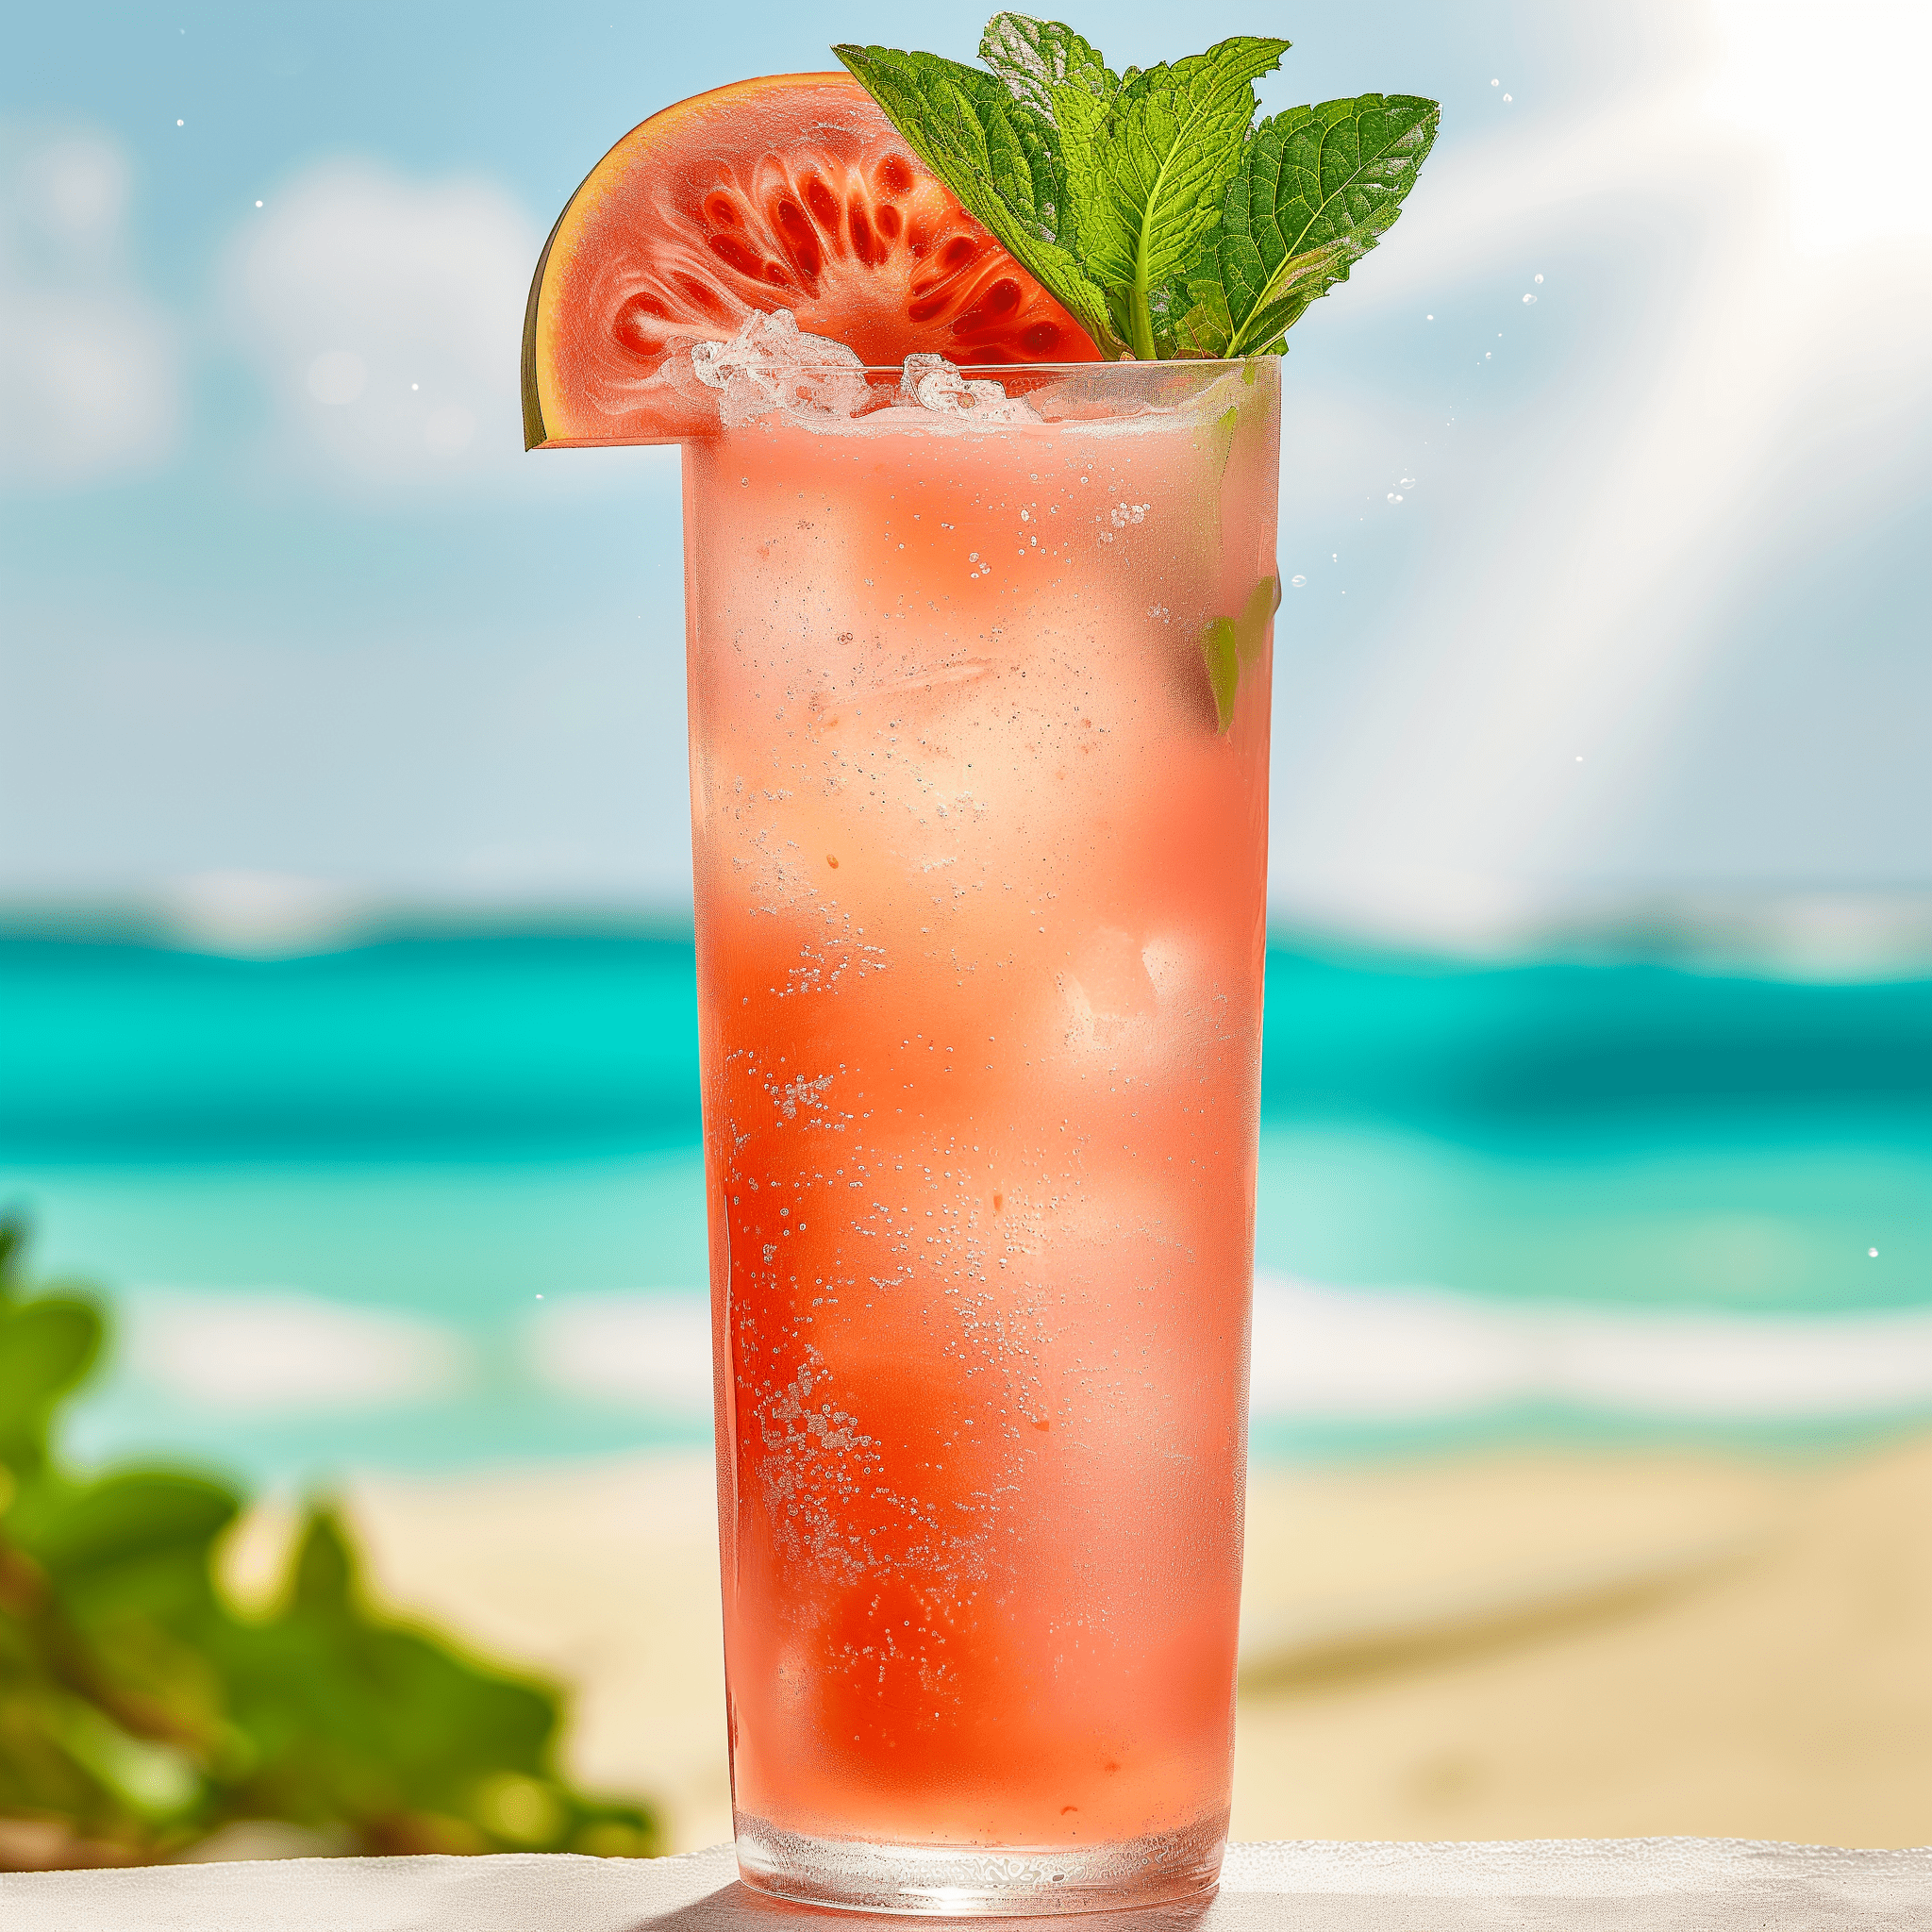 Tropical Guava Mocktail Recipe - The Tropical Guava Mocktail is a delightful blend of sweet and tangy flavors, with the guava nectar providing a luscious sweetness that is perfectly balanced by the zesty lemon juice. The mint leaves add a refreshing herbal undertone that makes the drink light and invigorating.